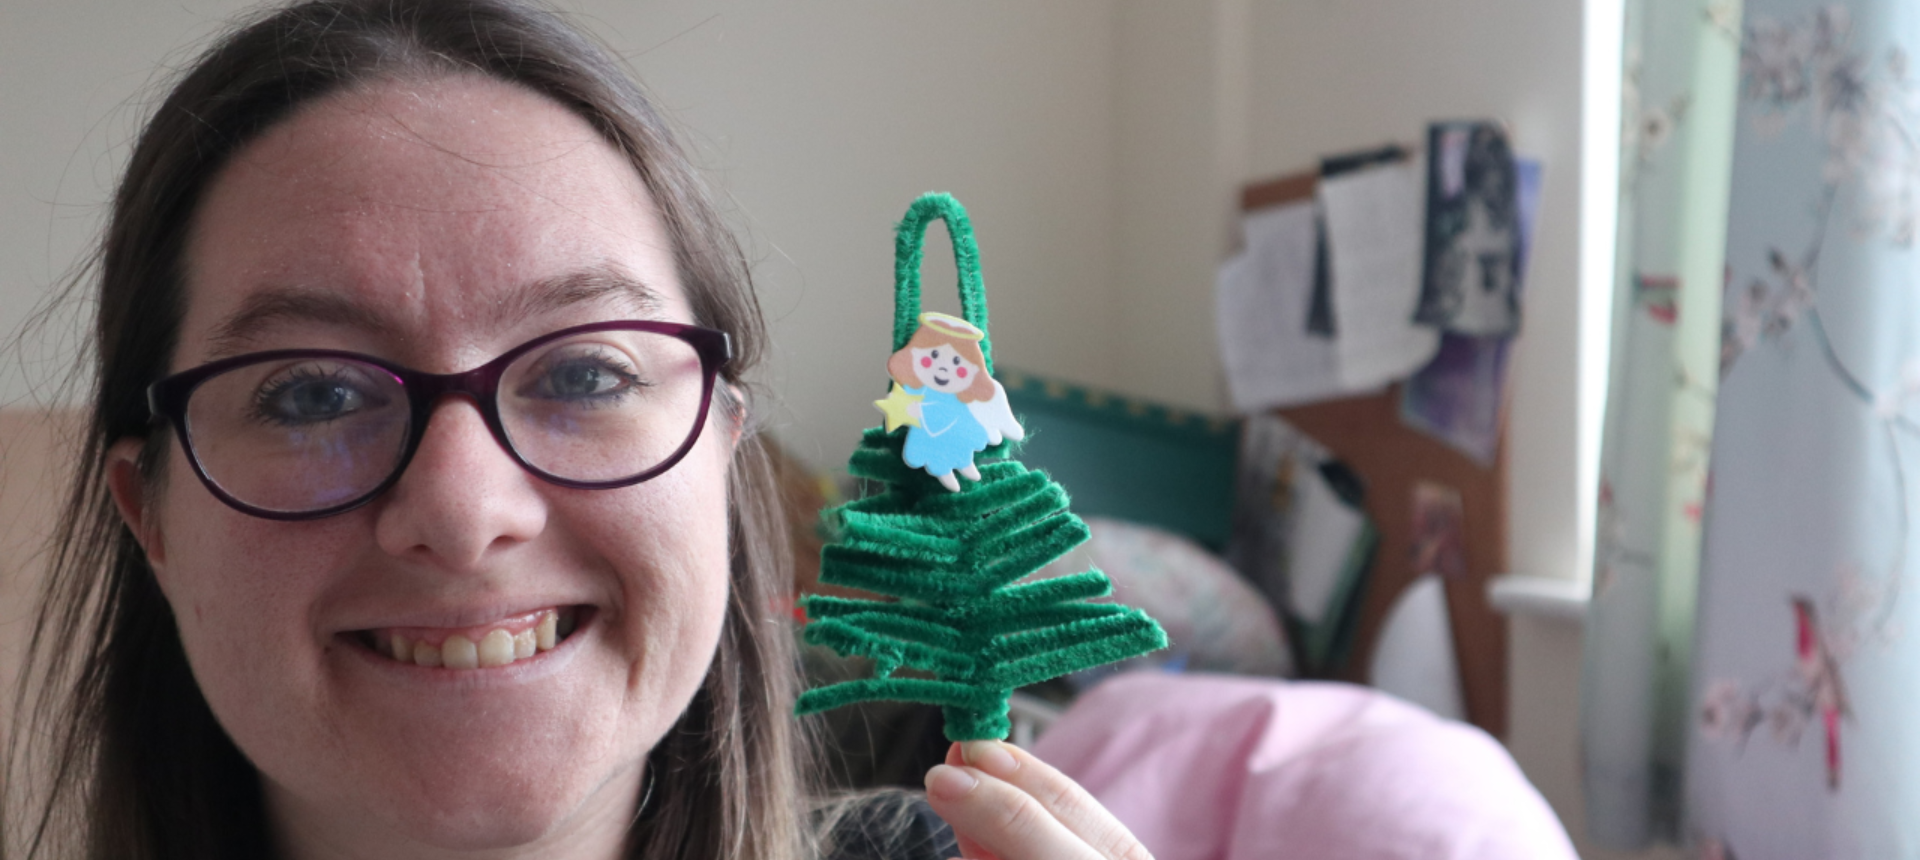 Holiday Crafts: Pipe Cleaner Tree Ornament